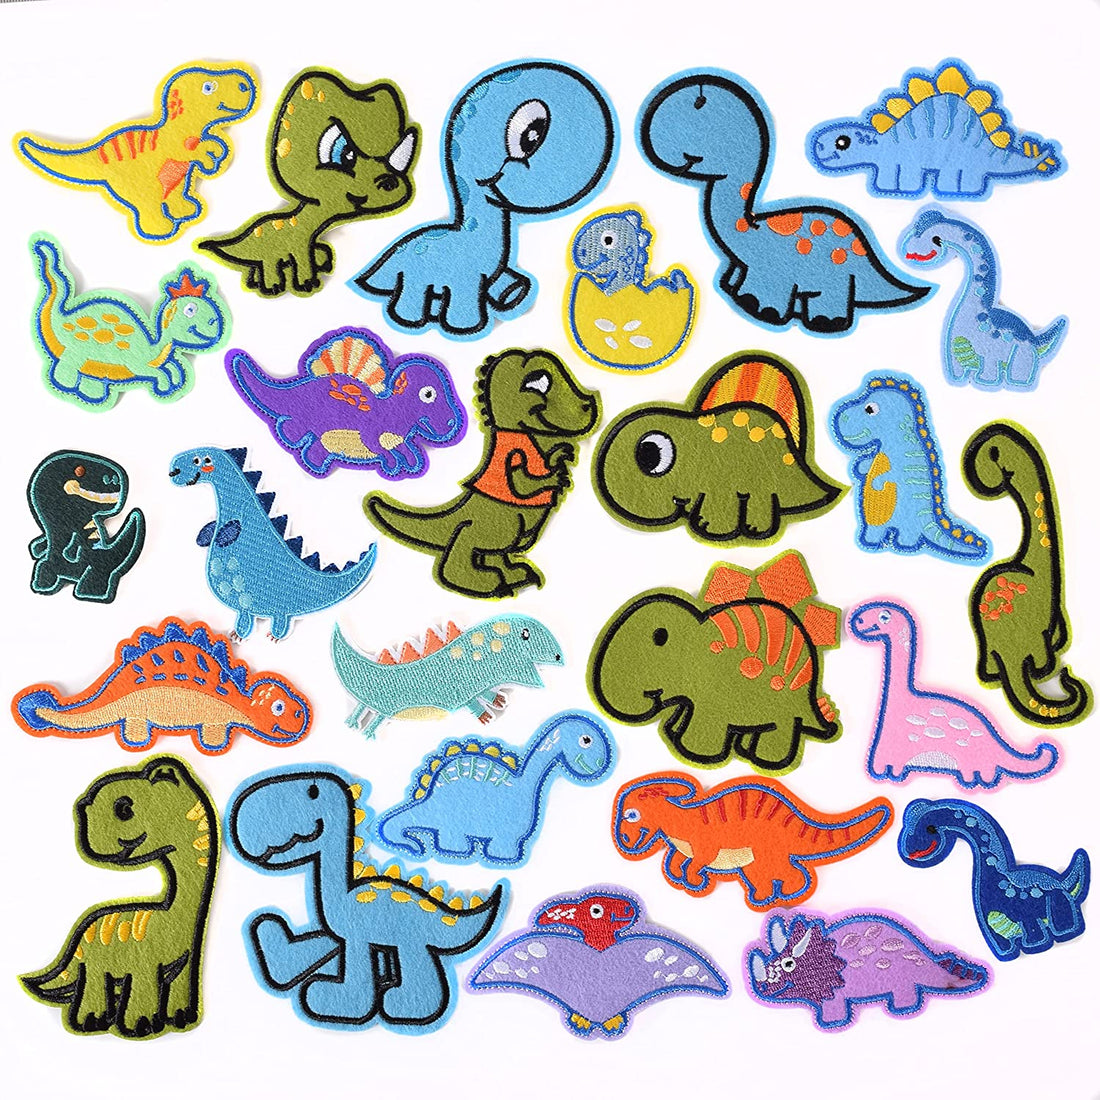 Dinosaur Embroidered Iron on Patch for Clothes, Iron-on Patches / Sew-on Appliques Patches for Clothing, Jackets, Backpacks, Caps, Jeans